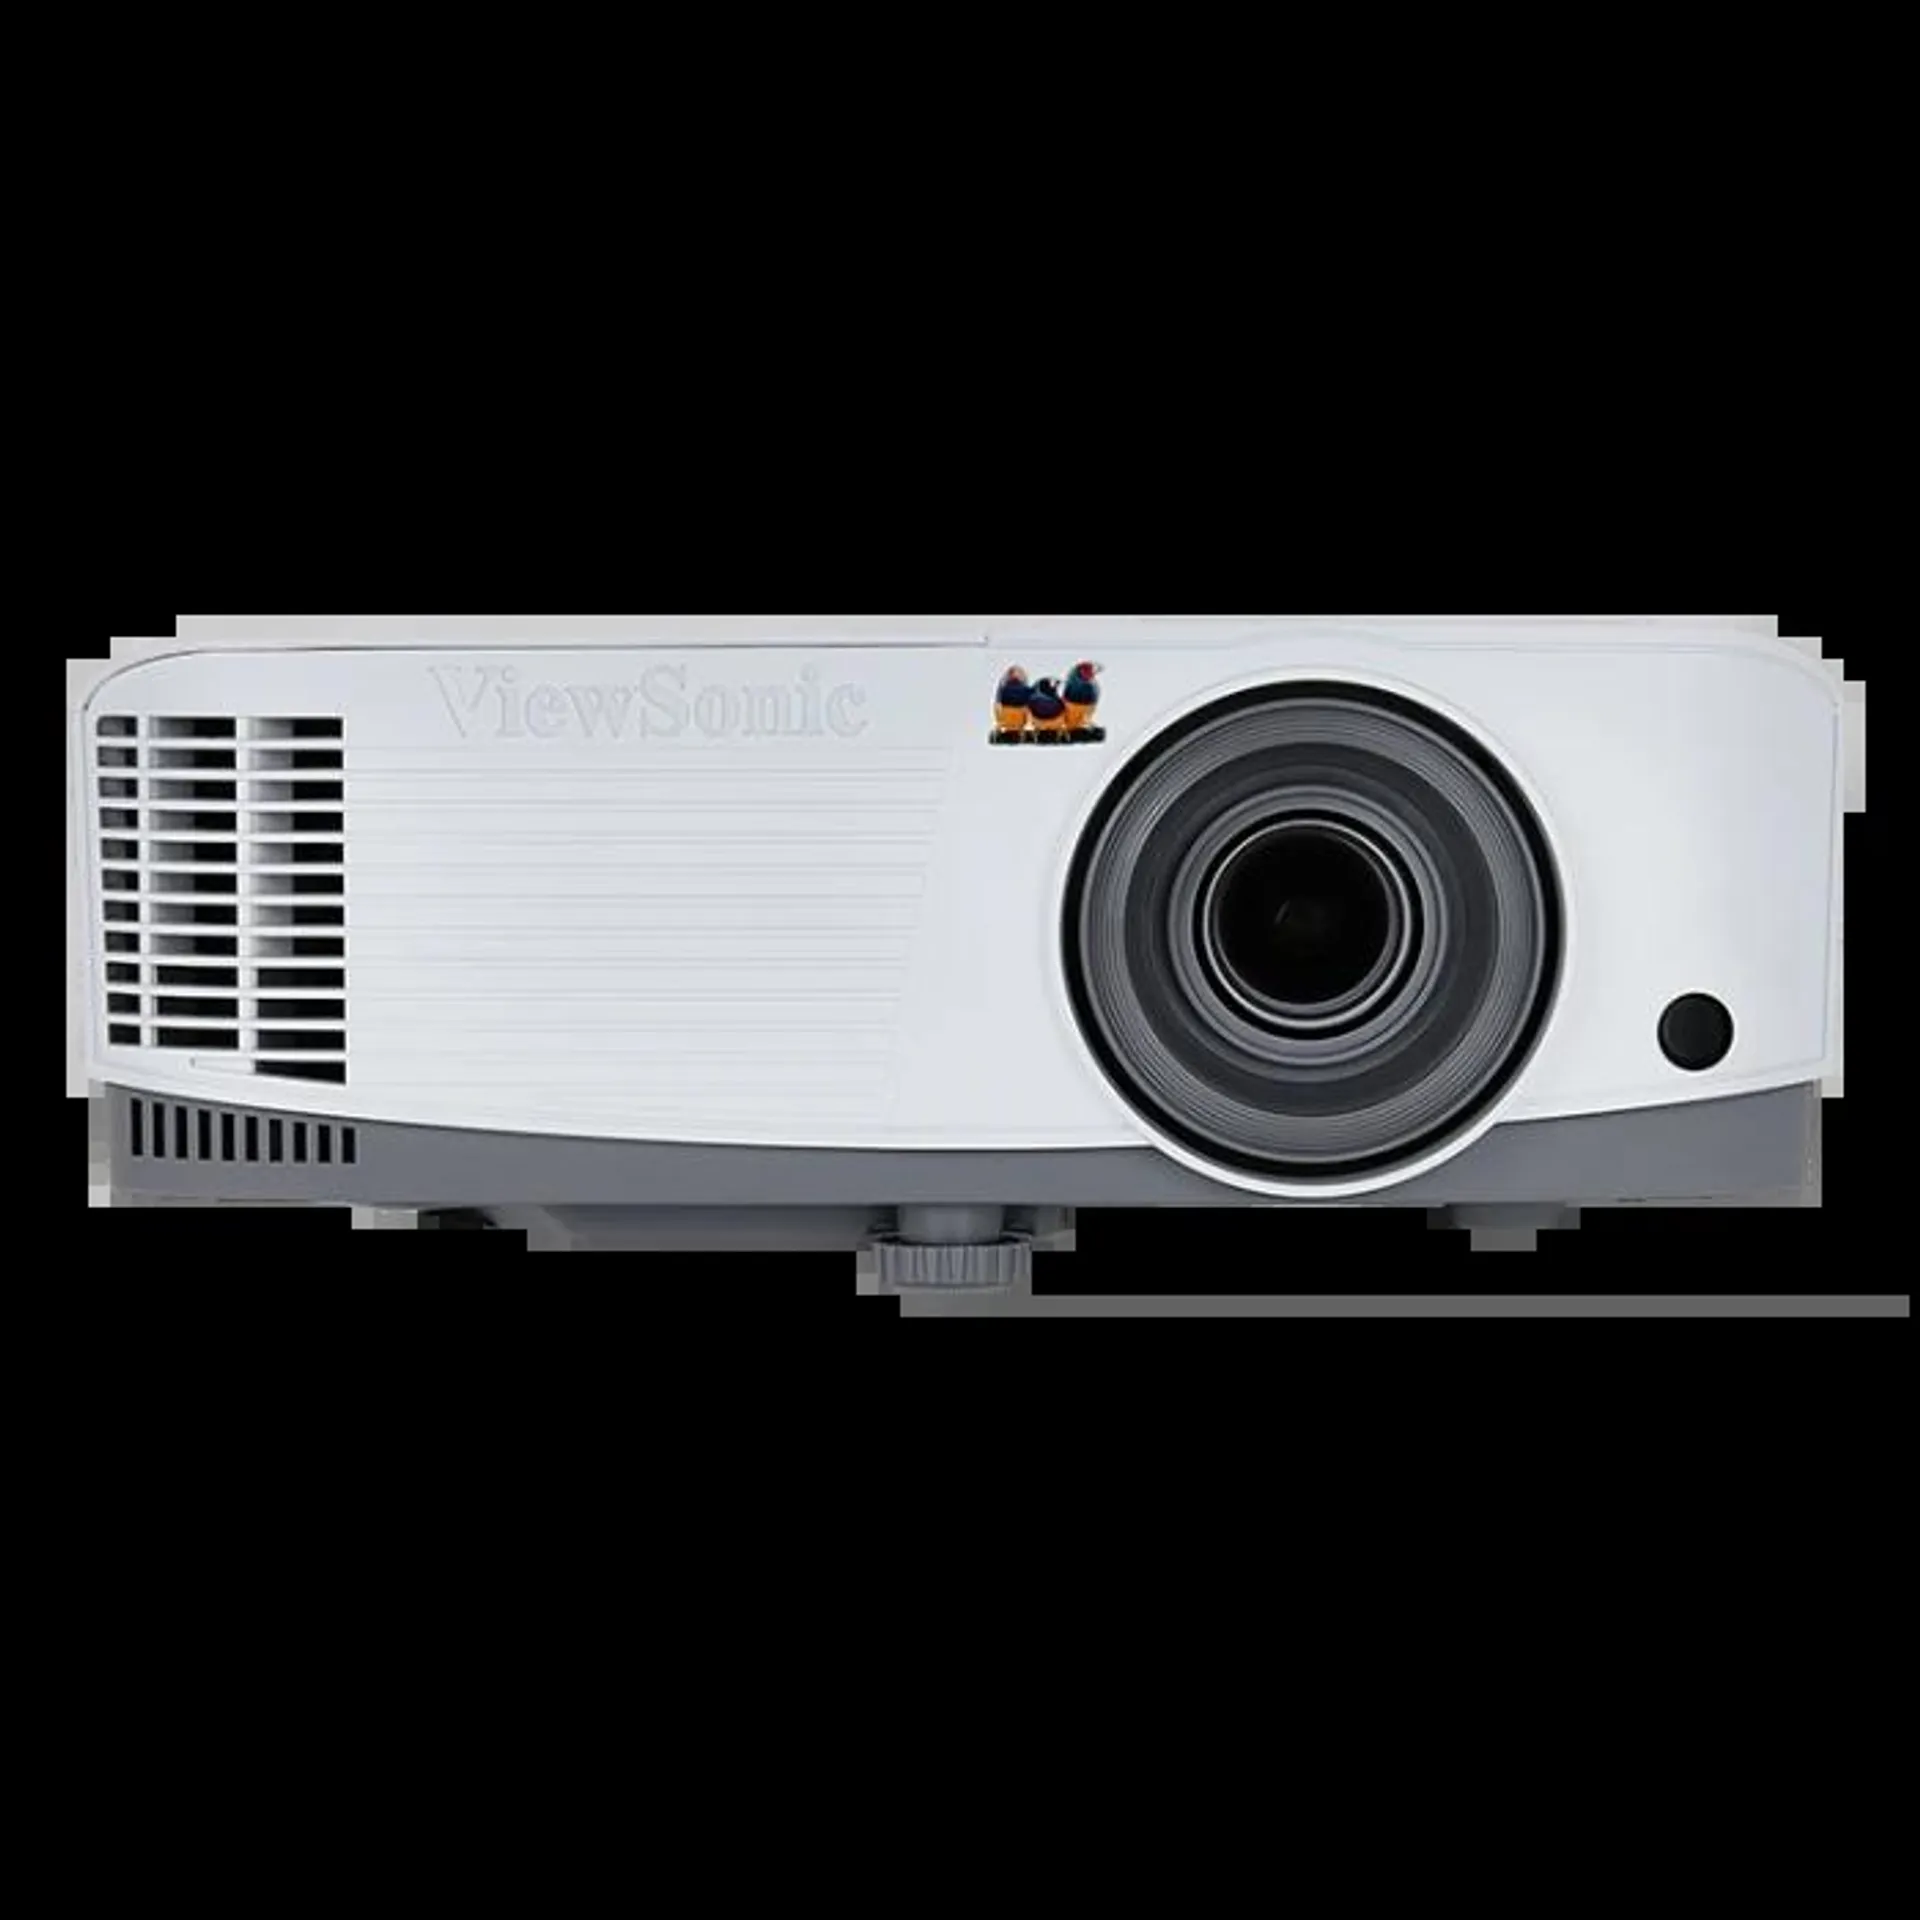 PG707W - 4000 Lumens WXGA Networkable Projector with 1.3x Optical Zoom and Low Input Lag